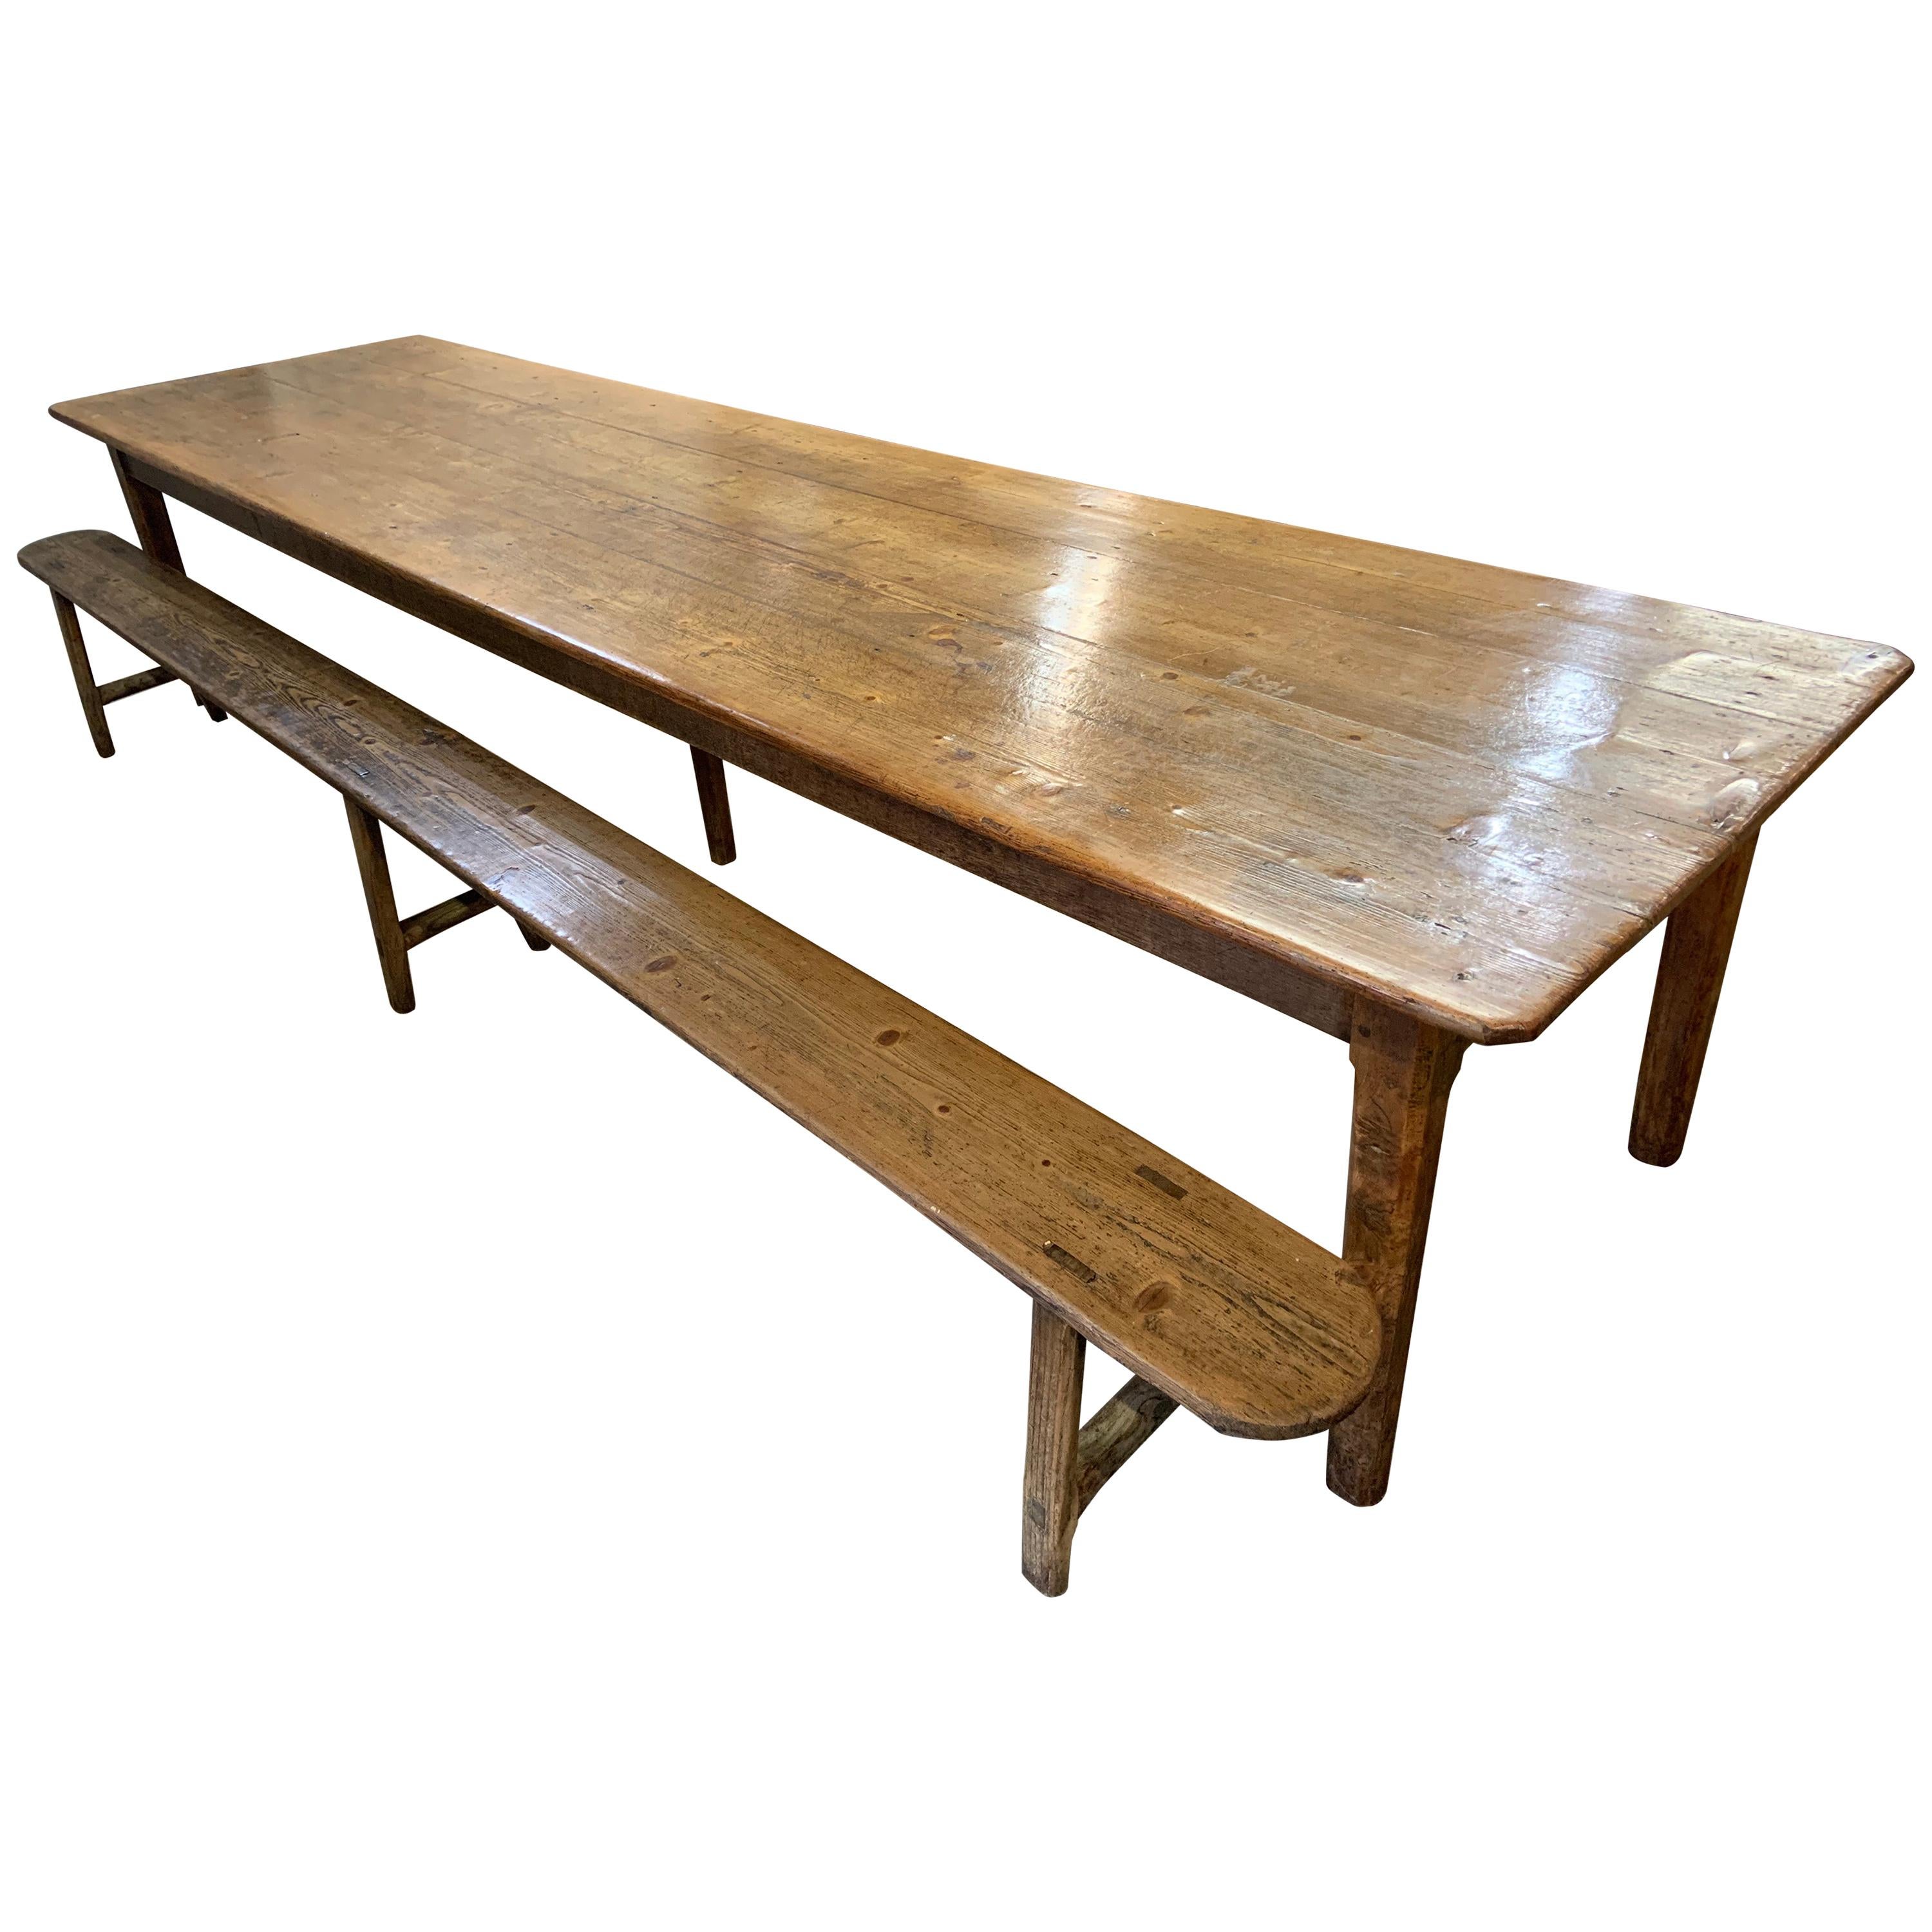 19th Century Large Farmhouse Table with Two Benches